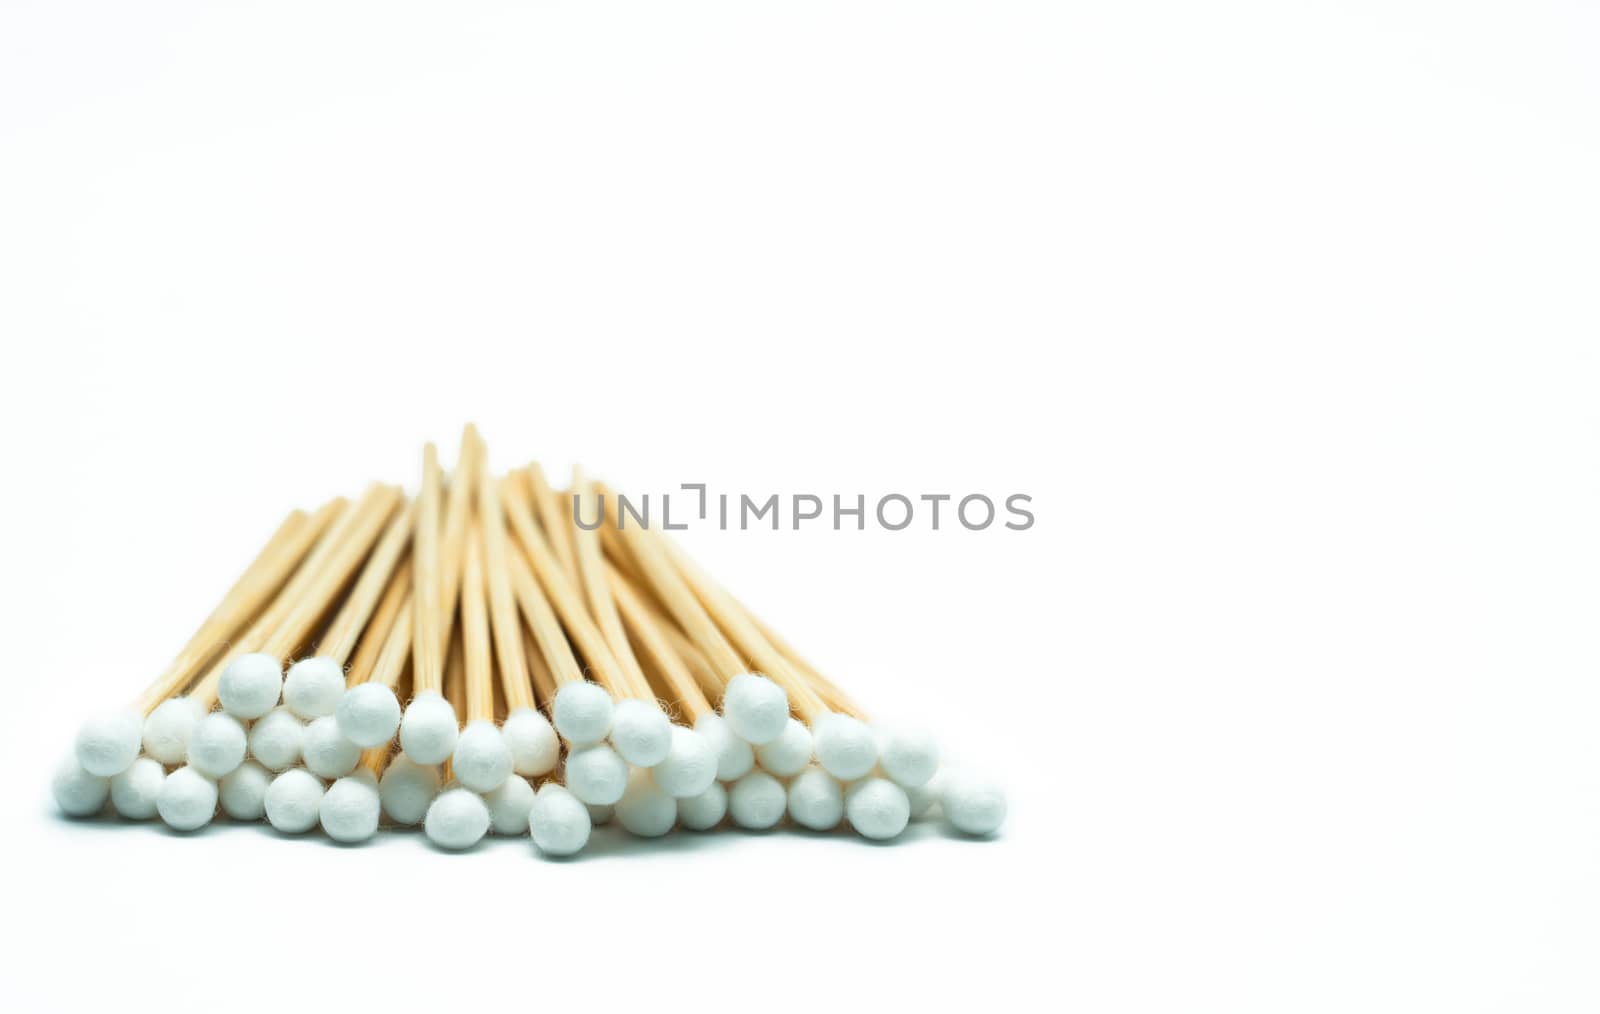 Cotton sticks isolated on white background with copy space. Medical equipment. Wound care supply.